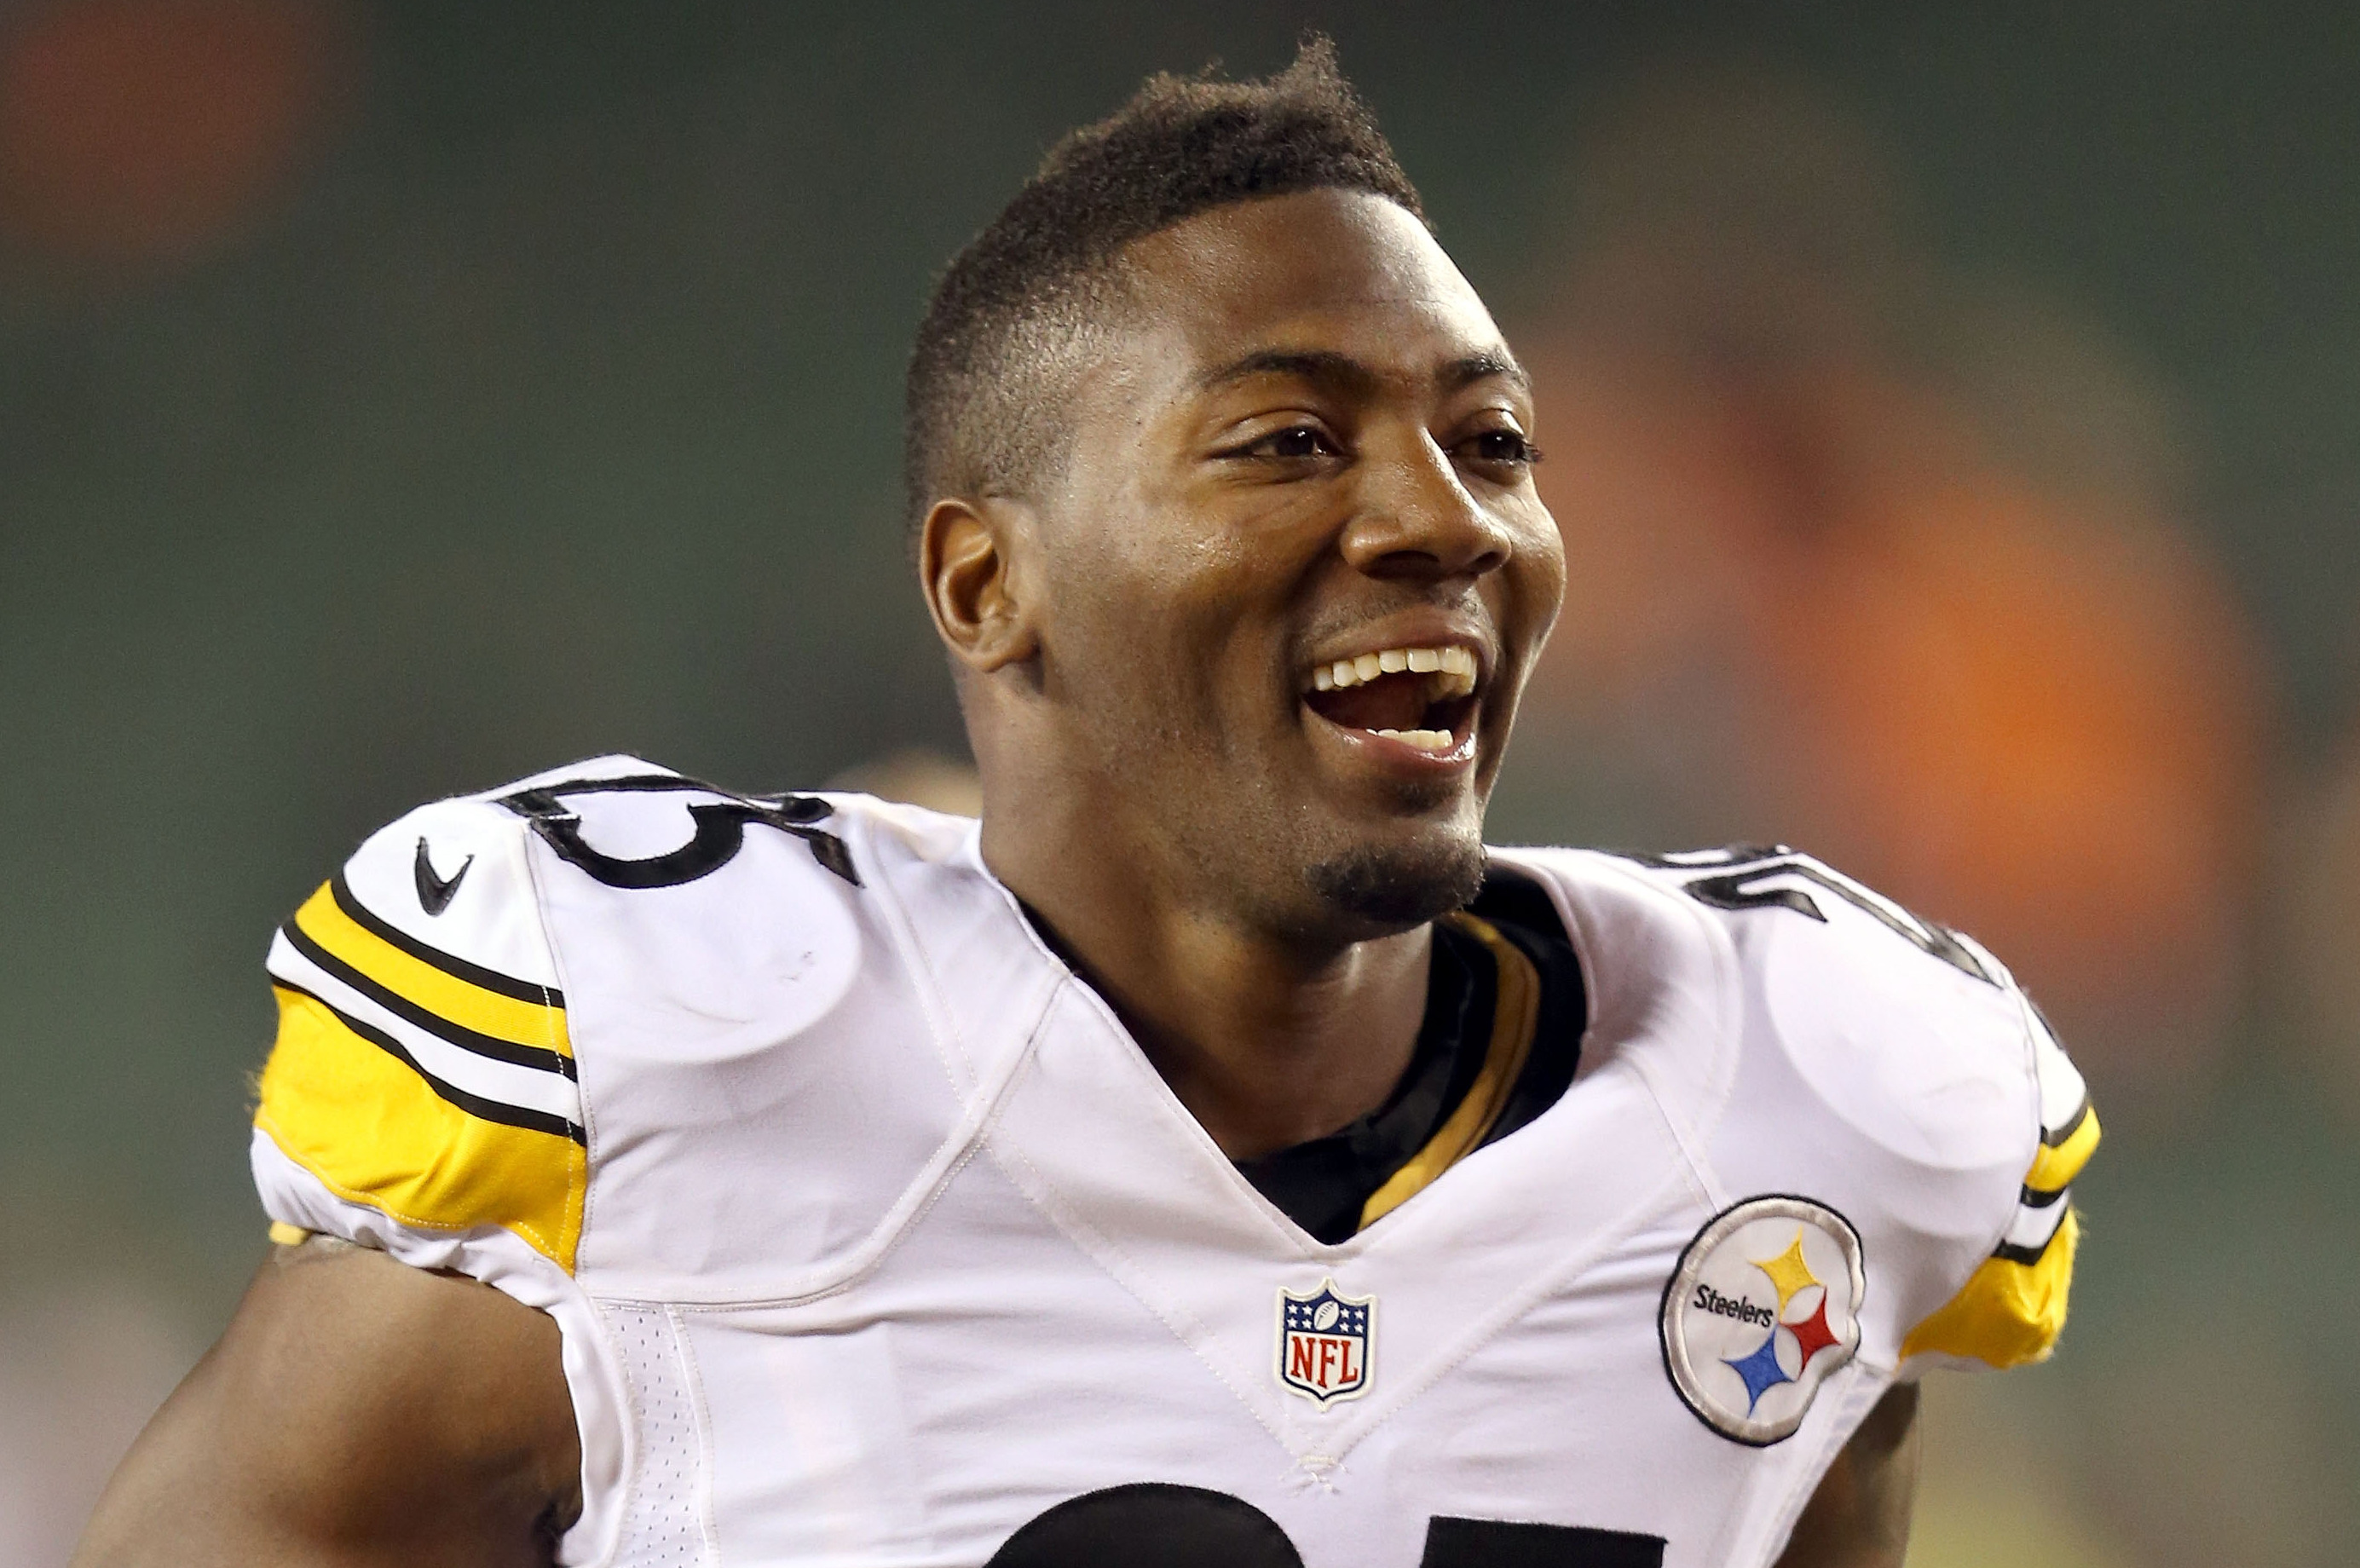 Ryan Clark to Steelers: Show up for work tomorrow at 8:00 a.m. - NBC Sports